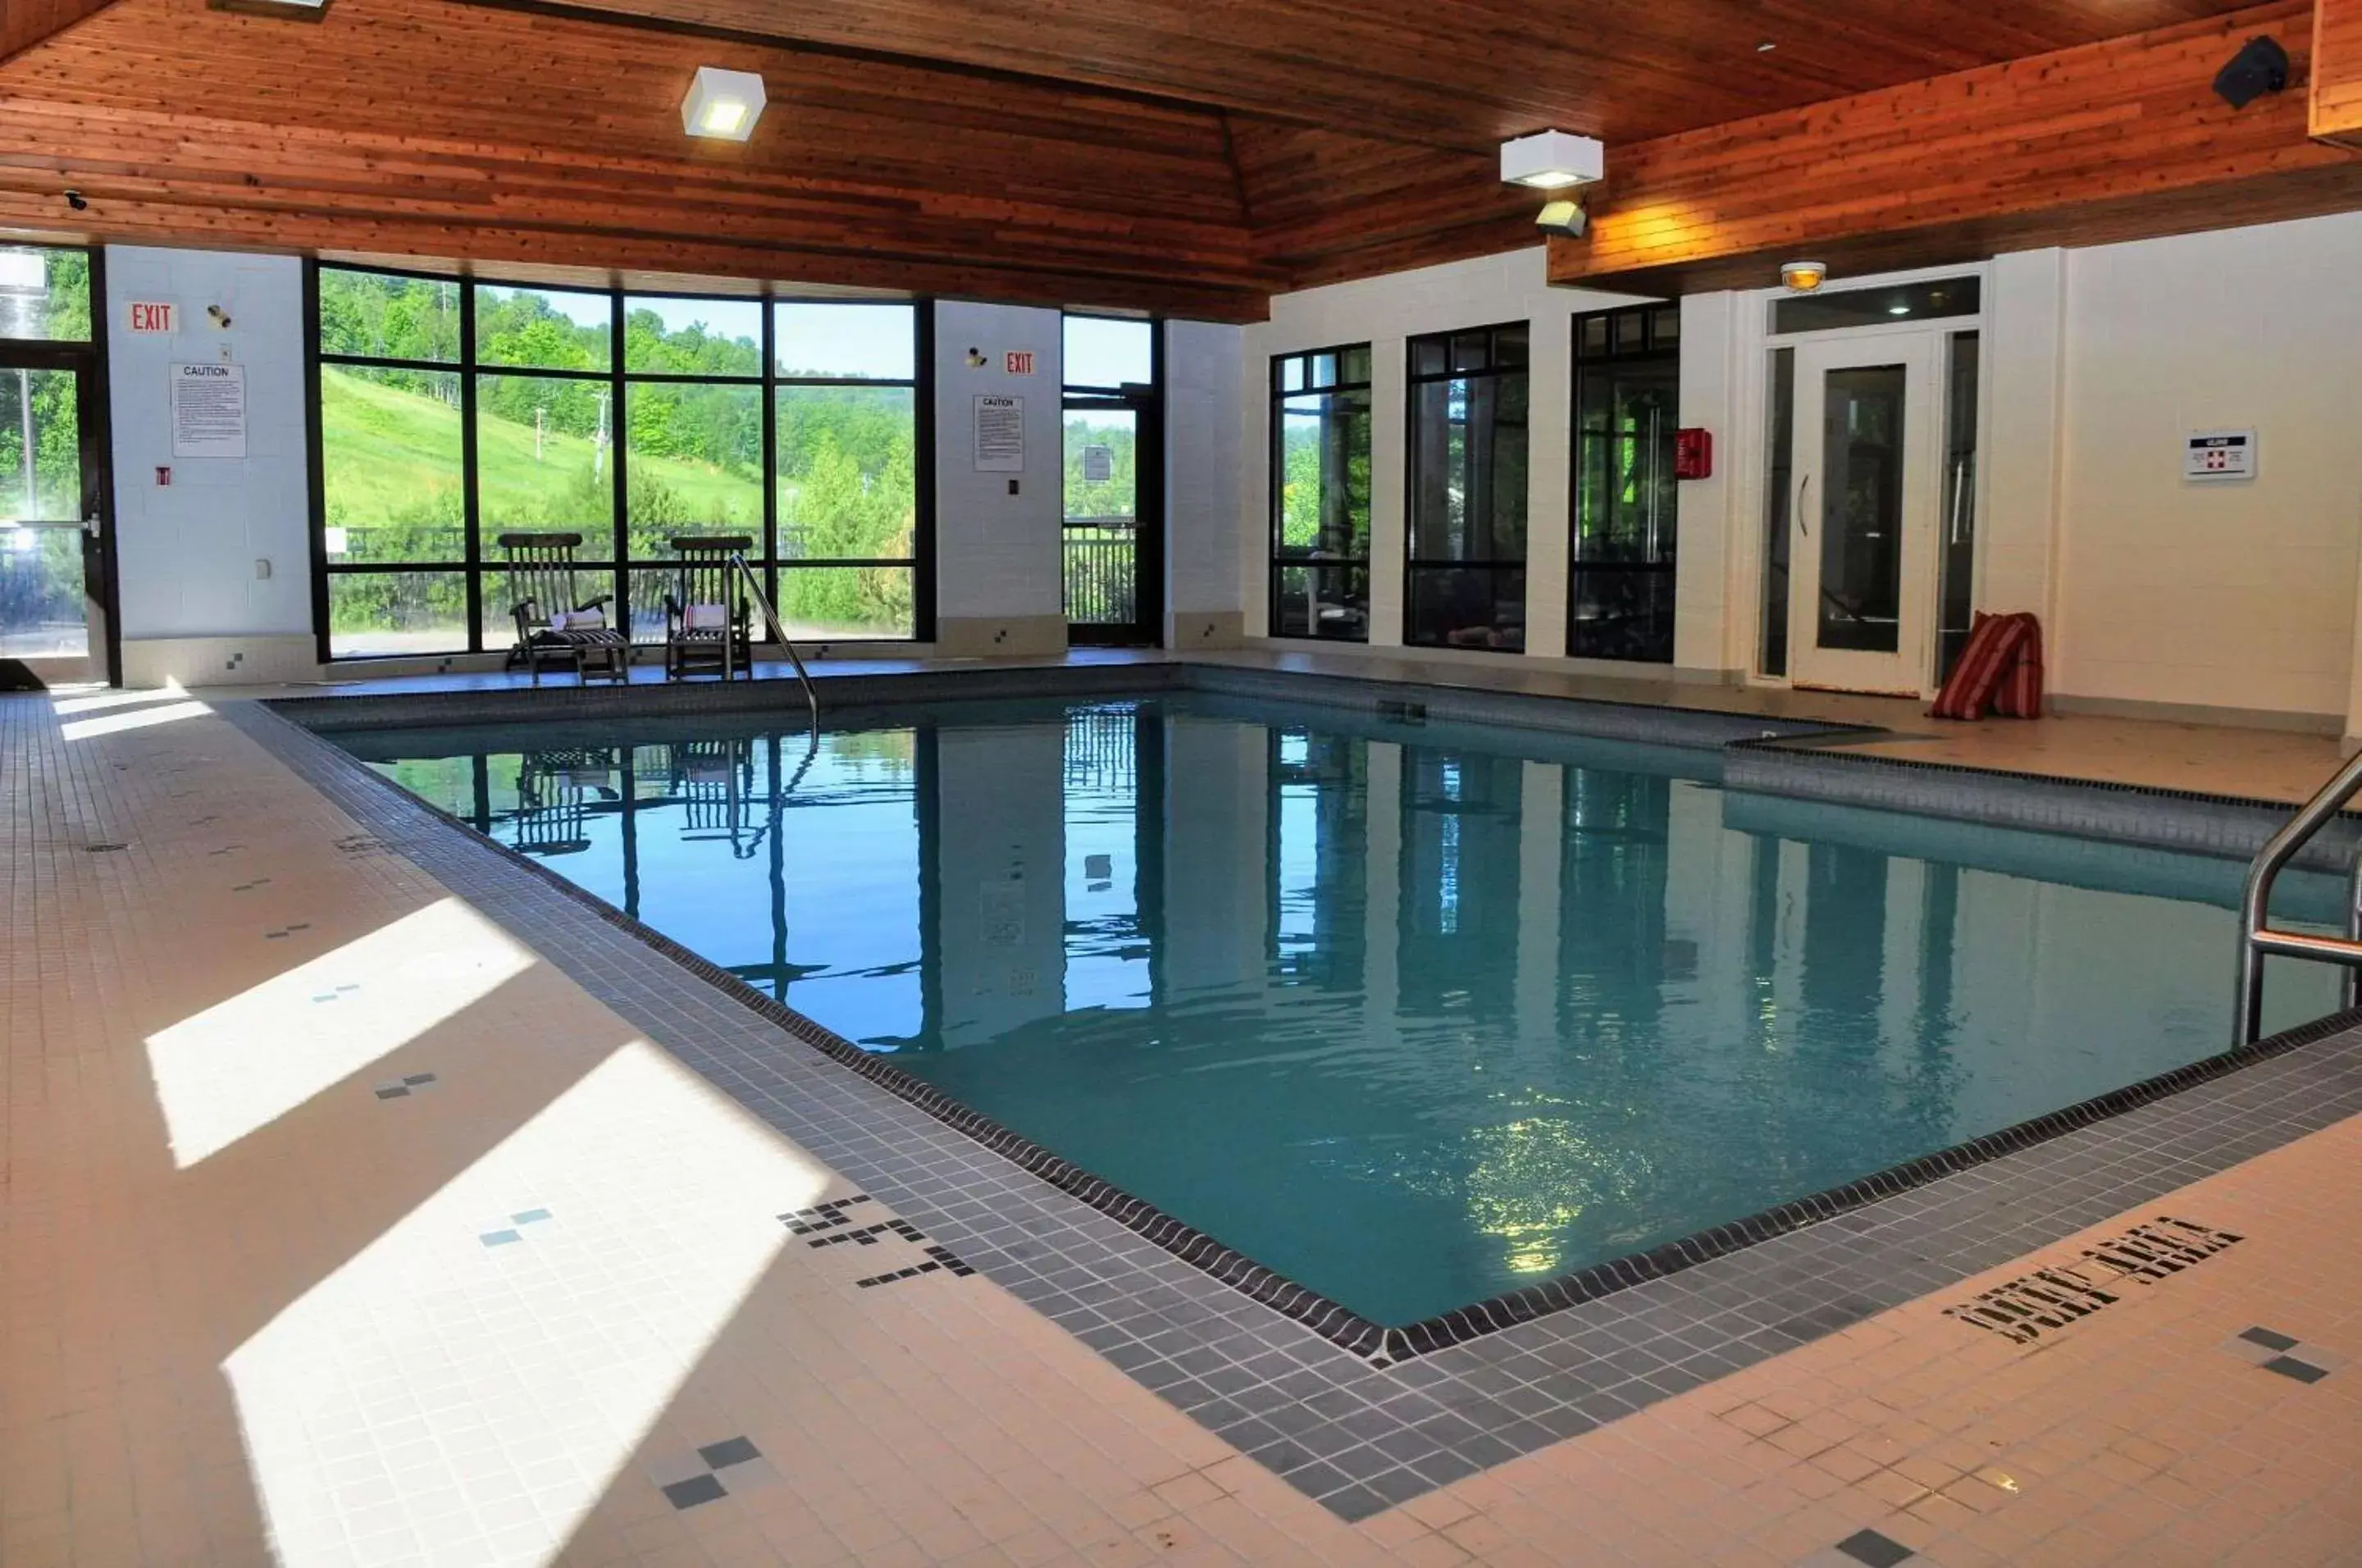 On site, Swimming Pool in Calabogie Peaks Hotel, Ascend Hotel Collection